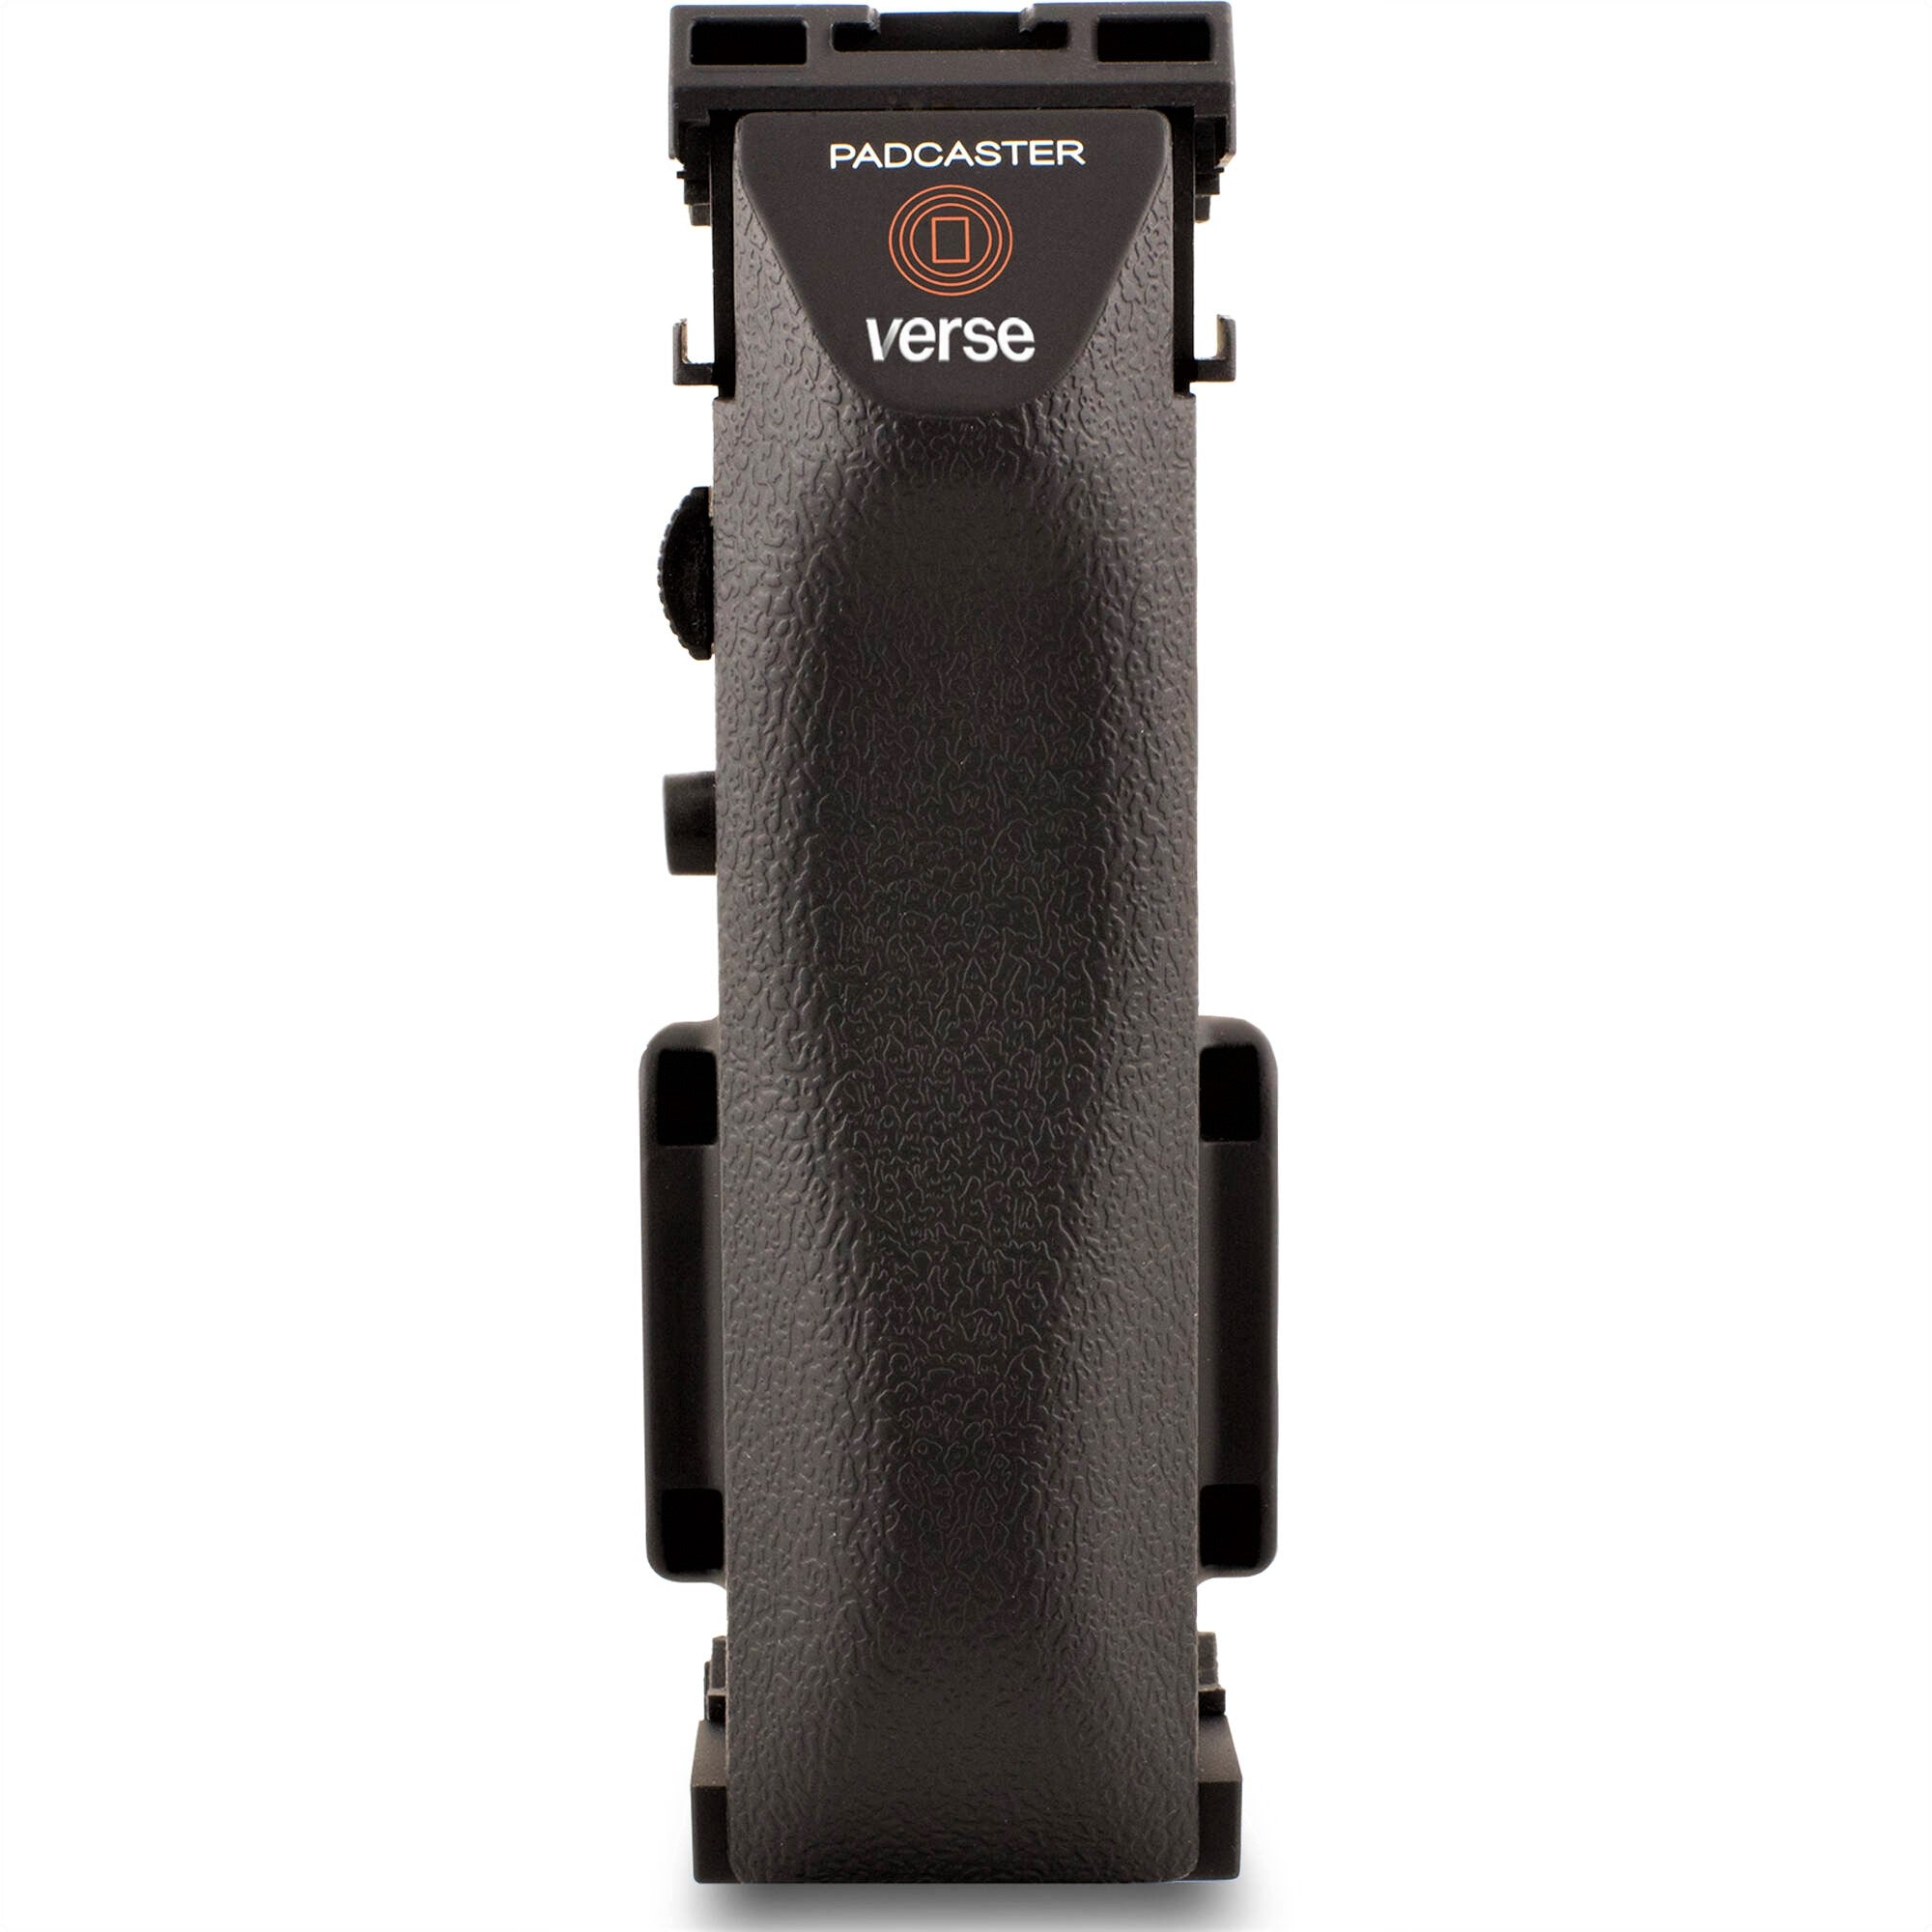 Padcaster Verse Grip in a Front View